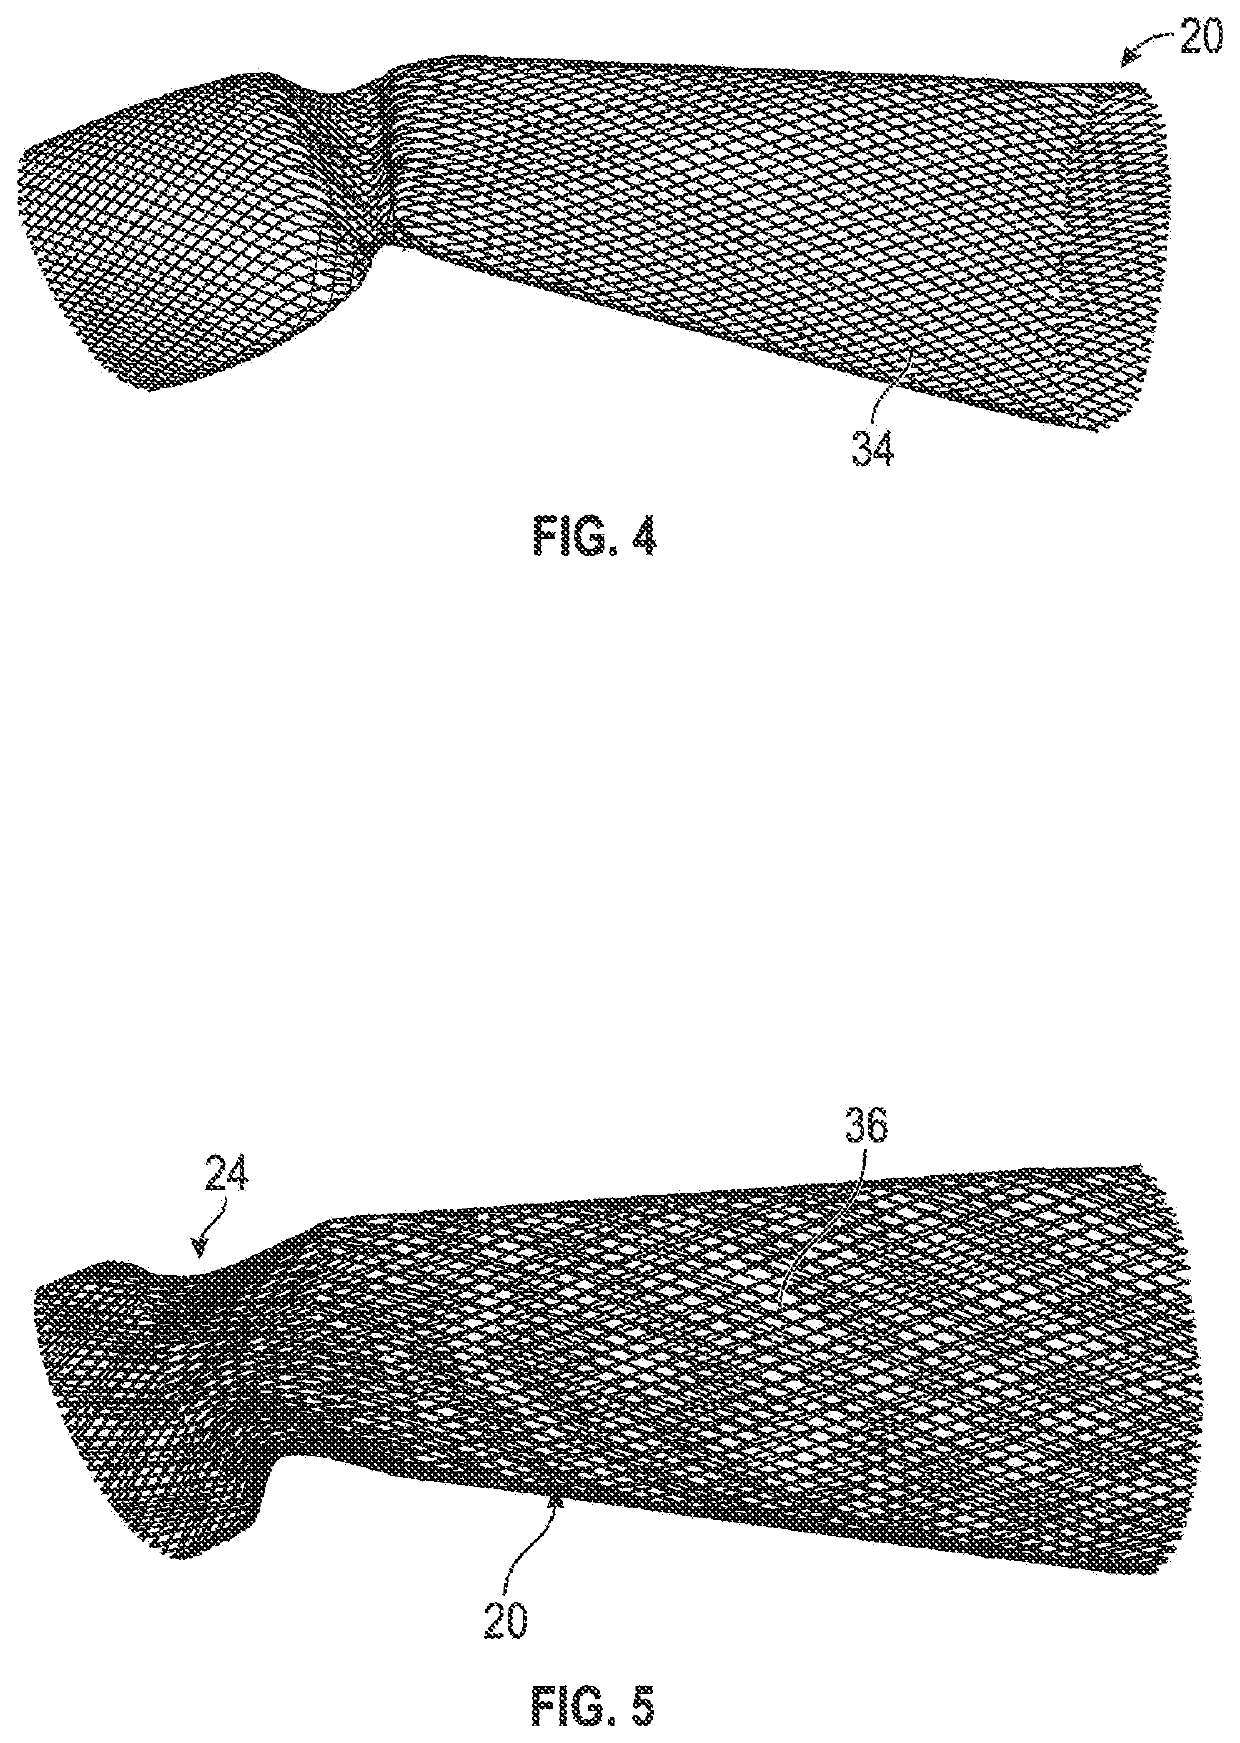 Surgical tissue protection sheath